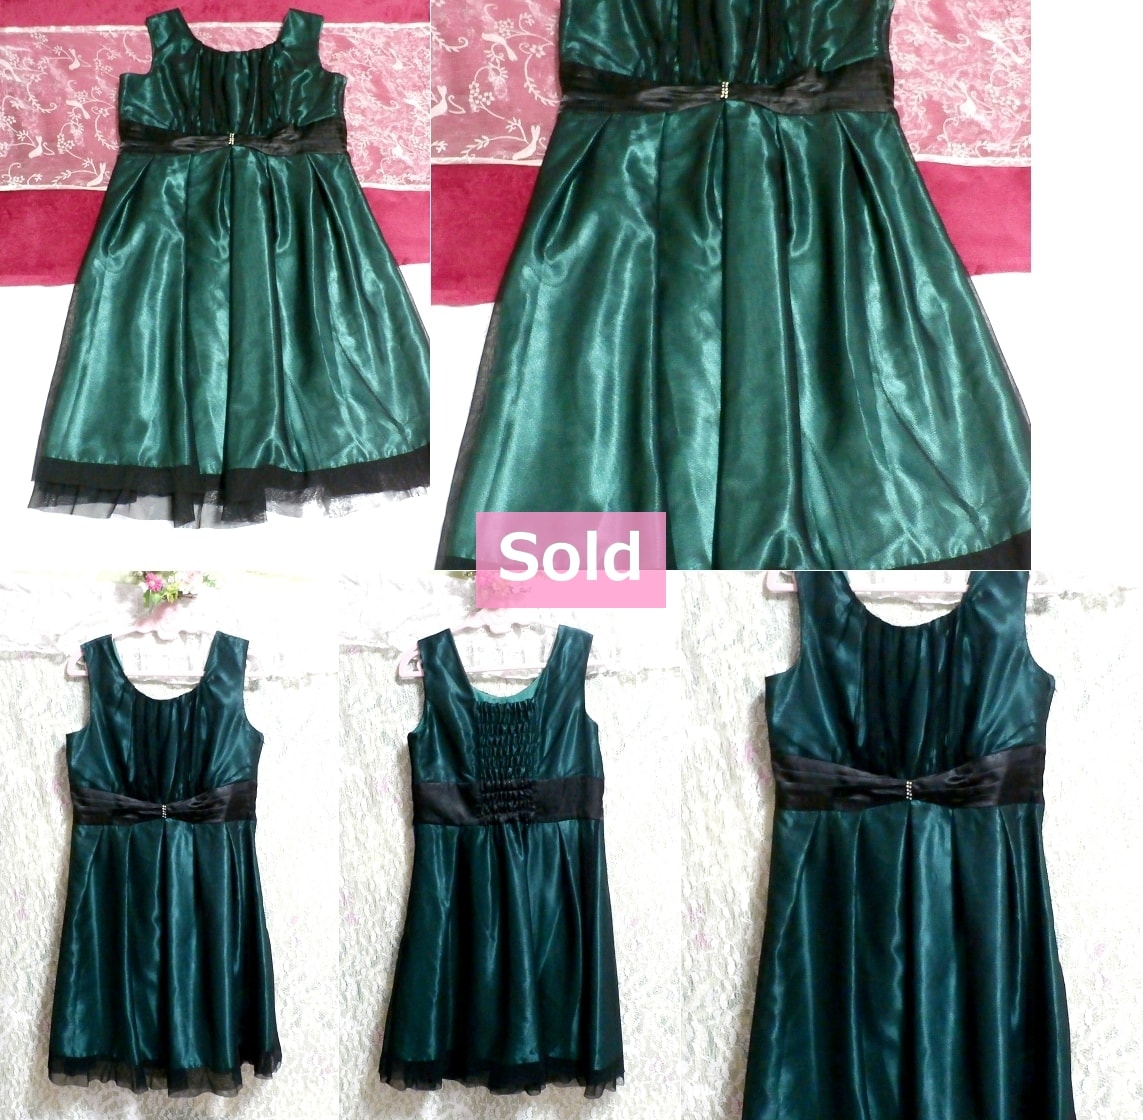 Emerald green black lace gloss onepiece party dress Emerald green black lace gloss onepiece party dress